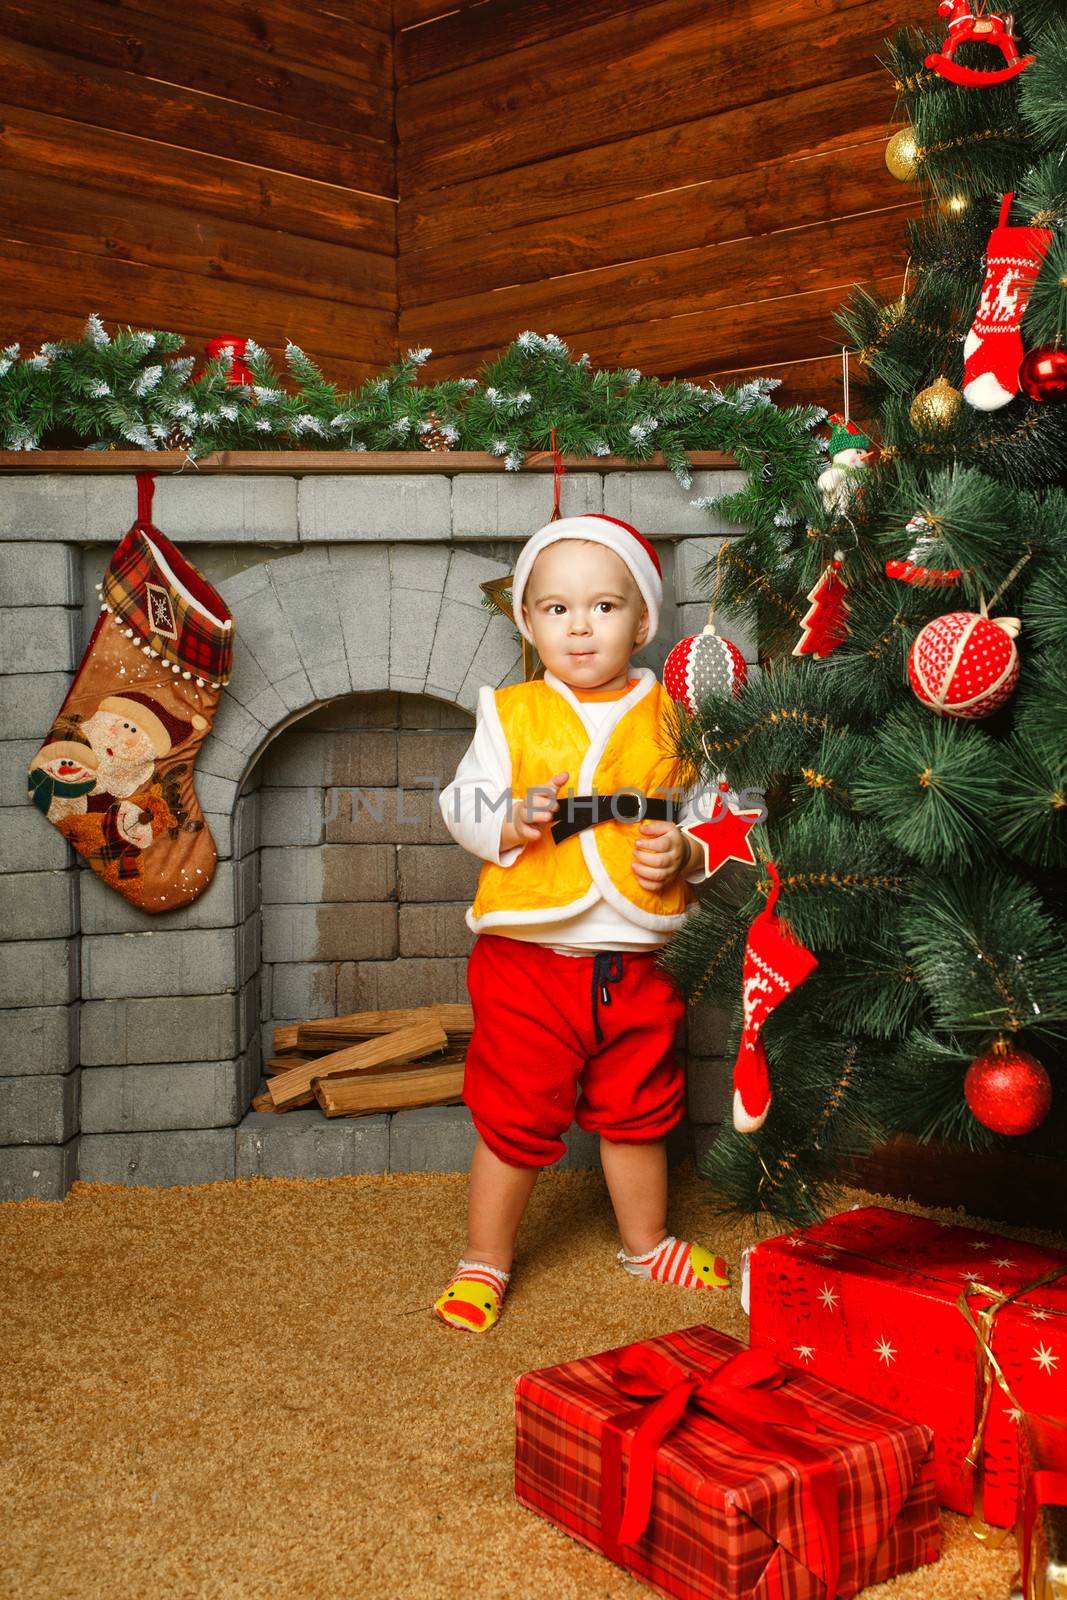 Child standing near Christmas tree beneath which lie gifts